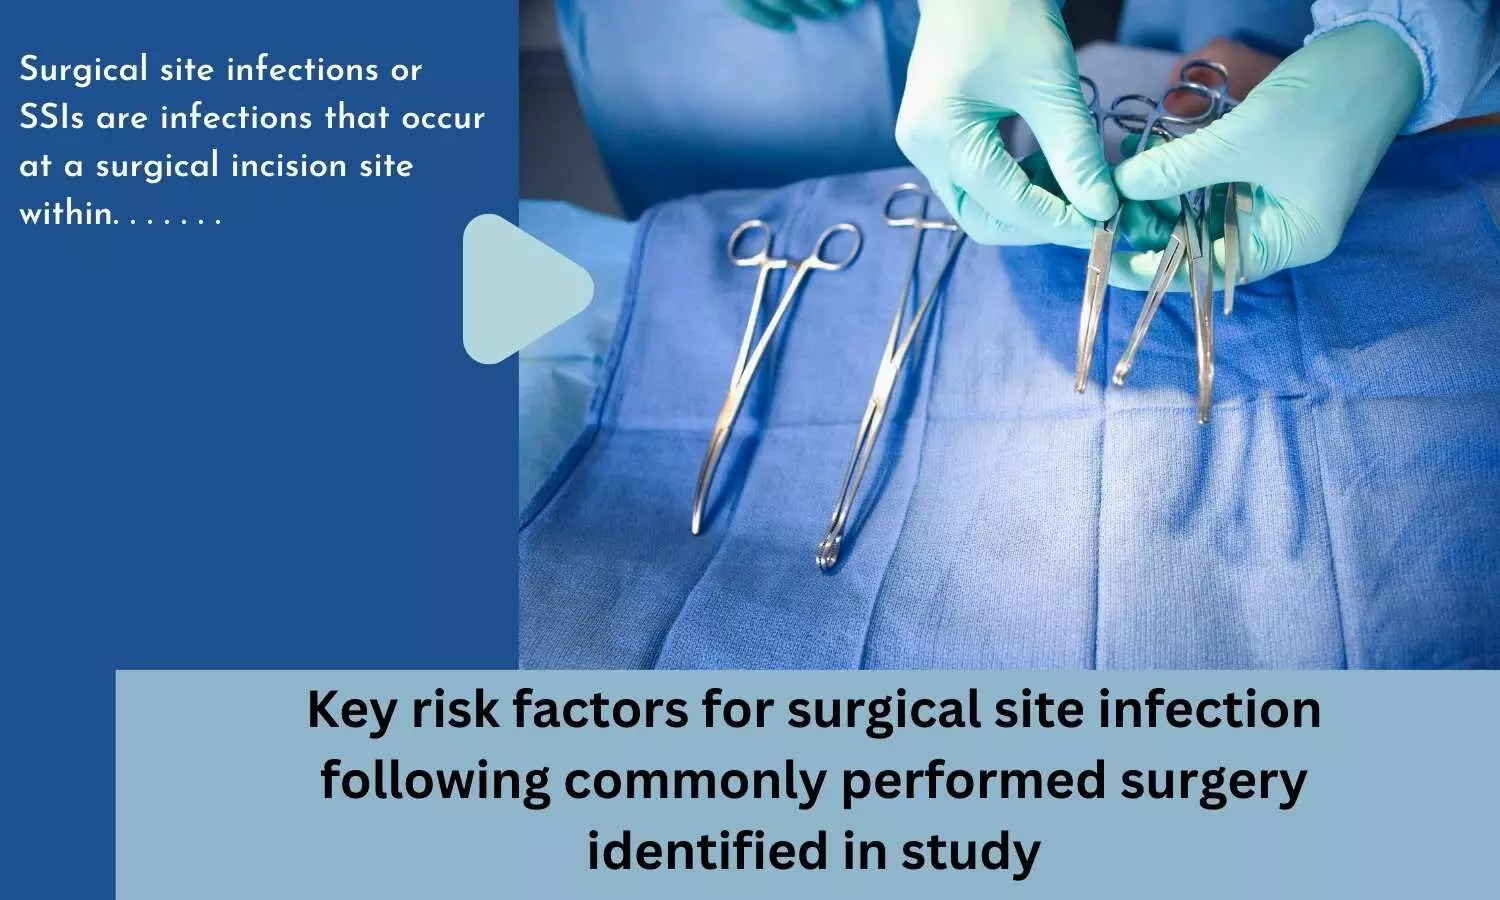 Key risk factors for surgical site infection following commonly performed surgery identified in study